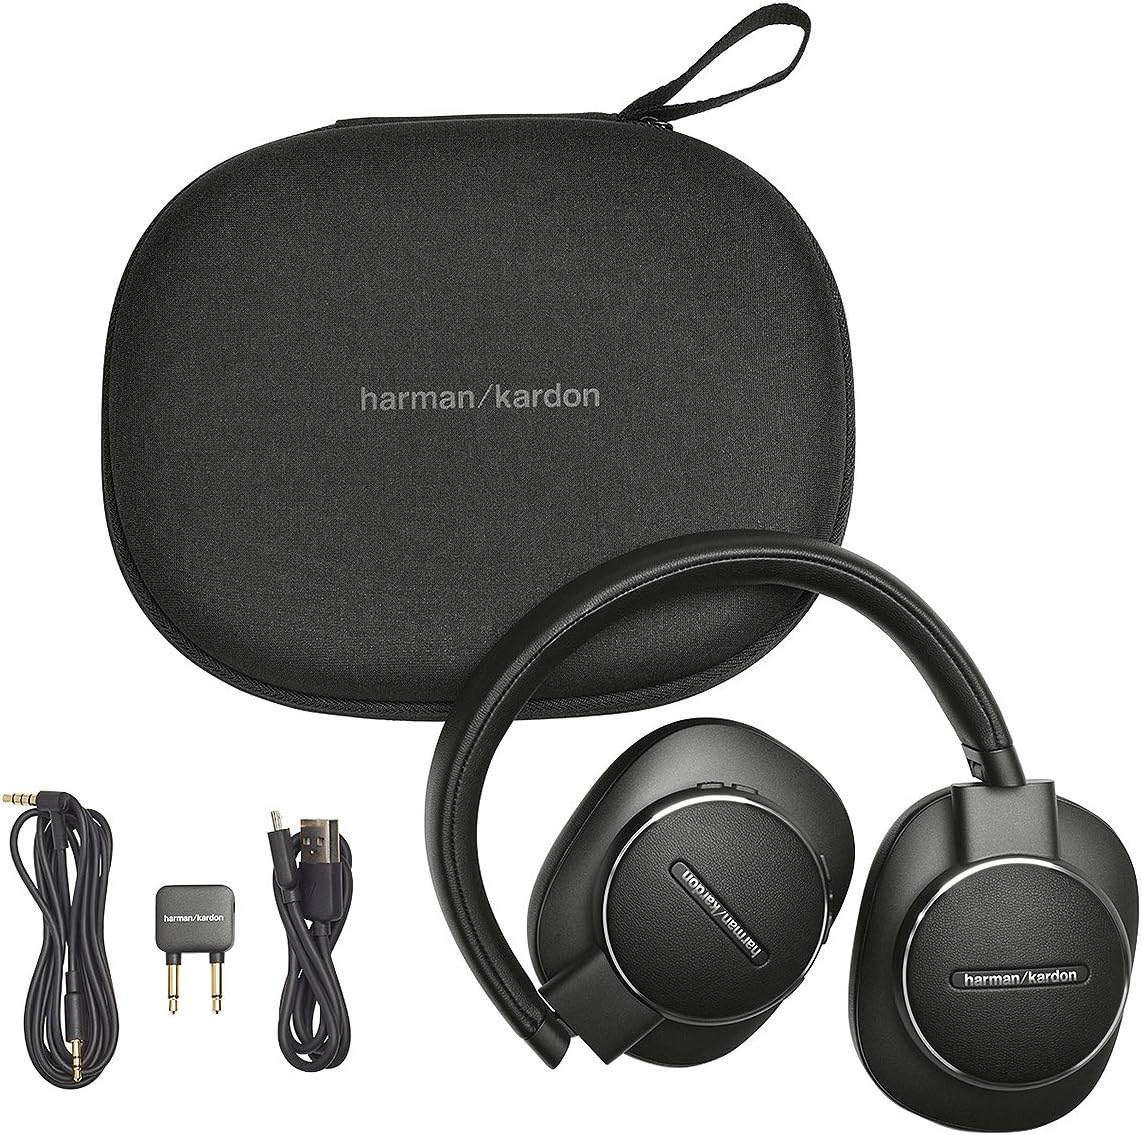 Harman Kardon Fly ANC Wireless Bluetooth Over-Ear Headphones with Active Noise Cancelling - Google Voice Assistant - Alexa Built-in (Retail Packaging)